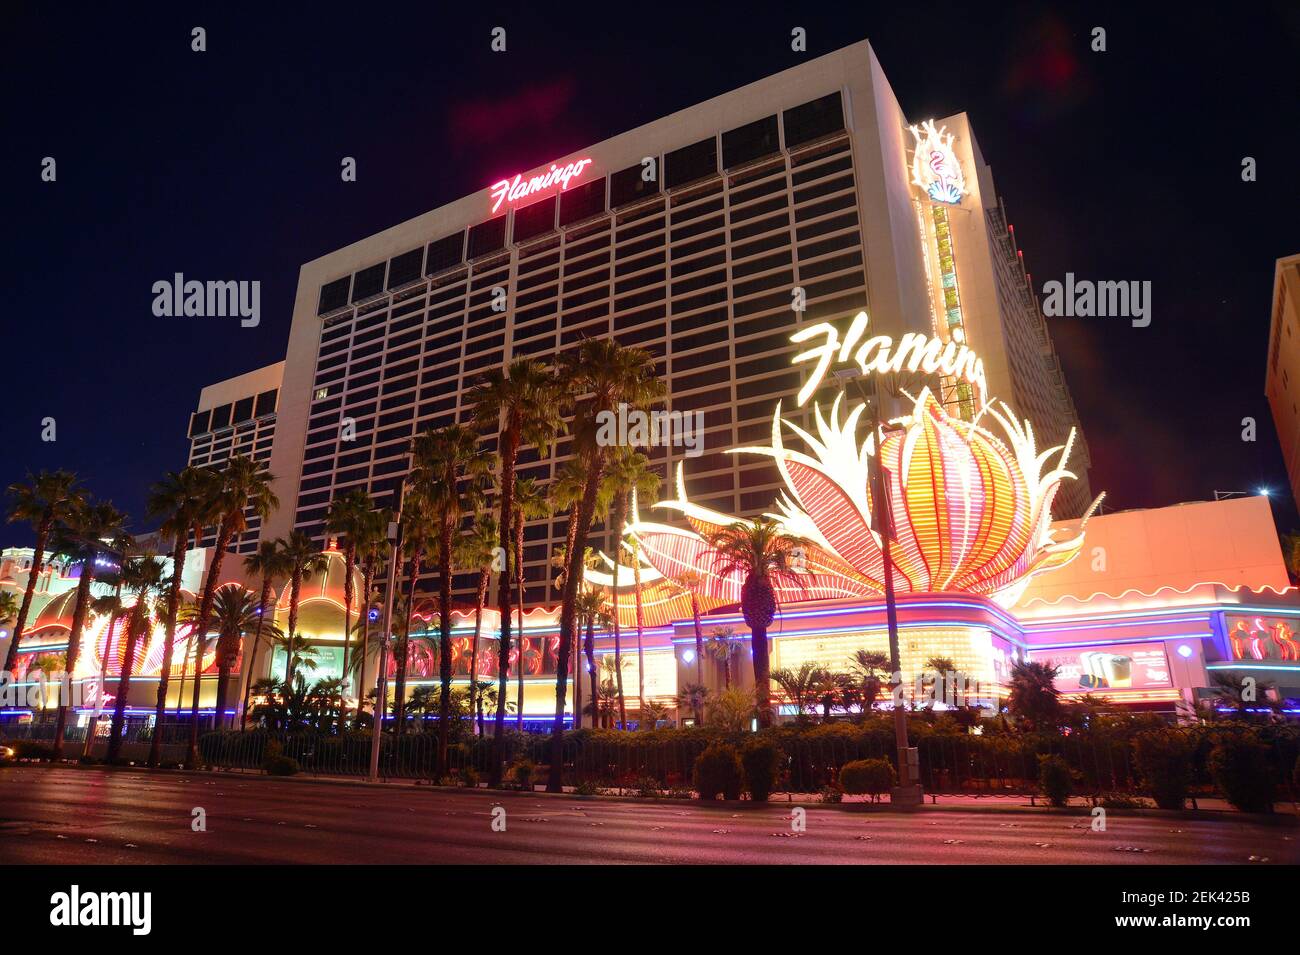 May 29, 2020; Las Vegas, Nevada, USA; General view of Flamingo Hilton hotel and casino. Las Vegas casinos and hotels have been shut down for over two months due to the COVID-19 pandemic. Nevada governor Steve Sisolak announced most hotel casinos will reopen June 4 with precautions in place to minimize the spread of COVID-19. Mandatory Credit: Gary A. Vasquez-USA TODAY NETWORK/Sipa USA Stock Photo